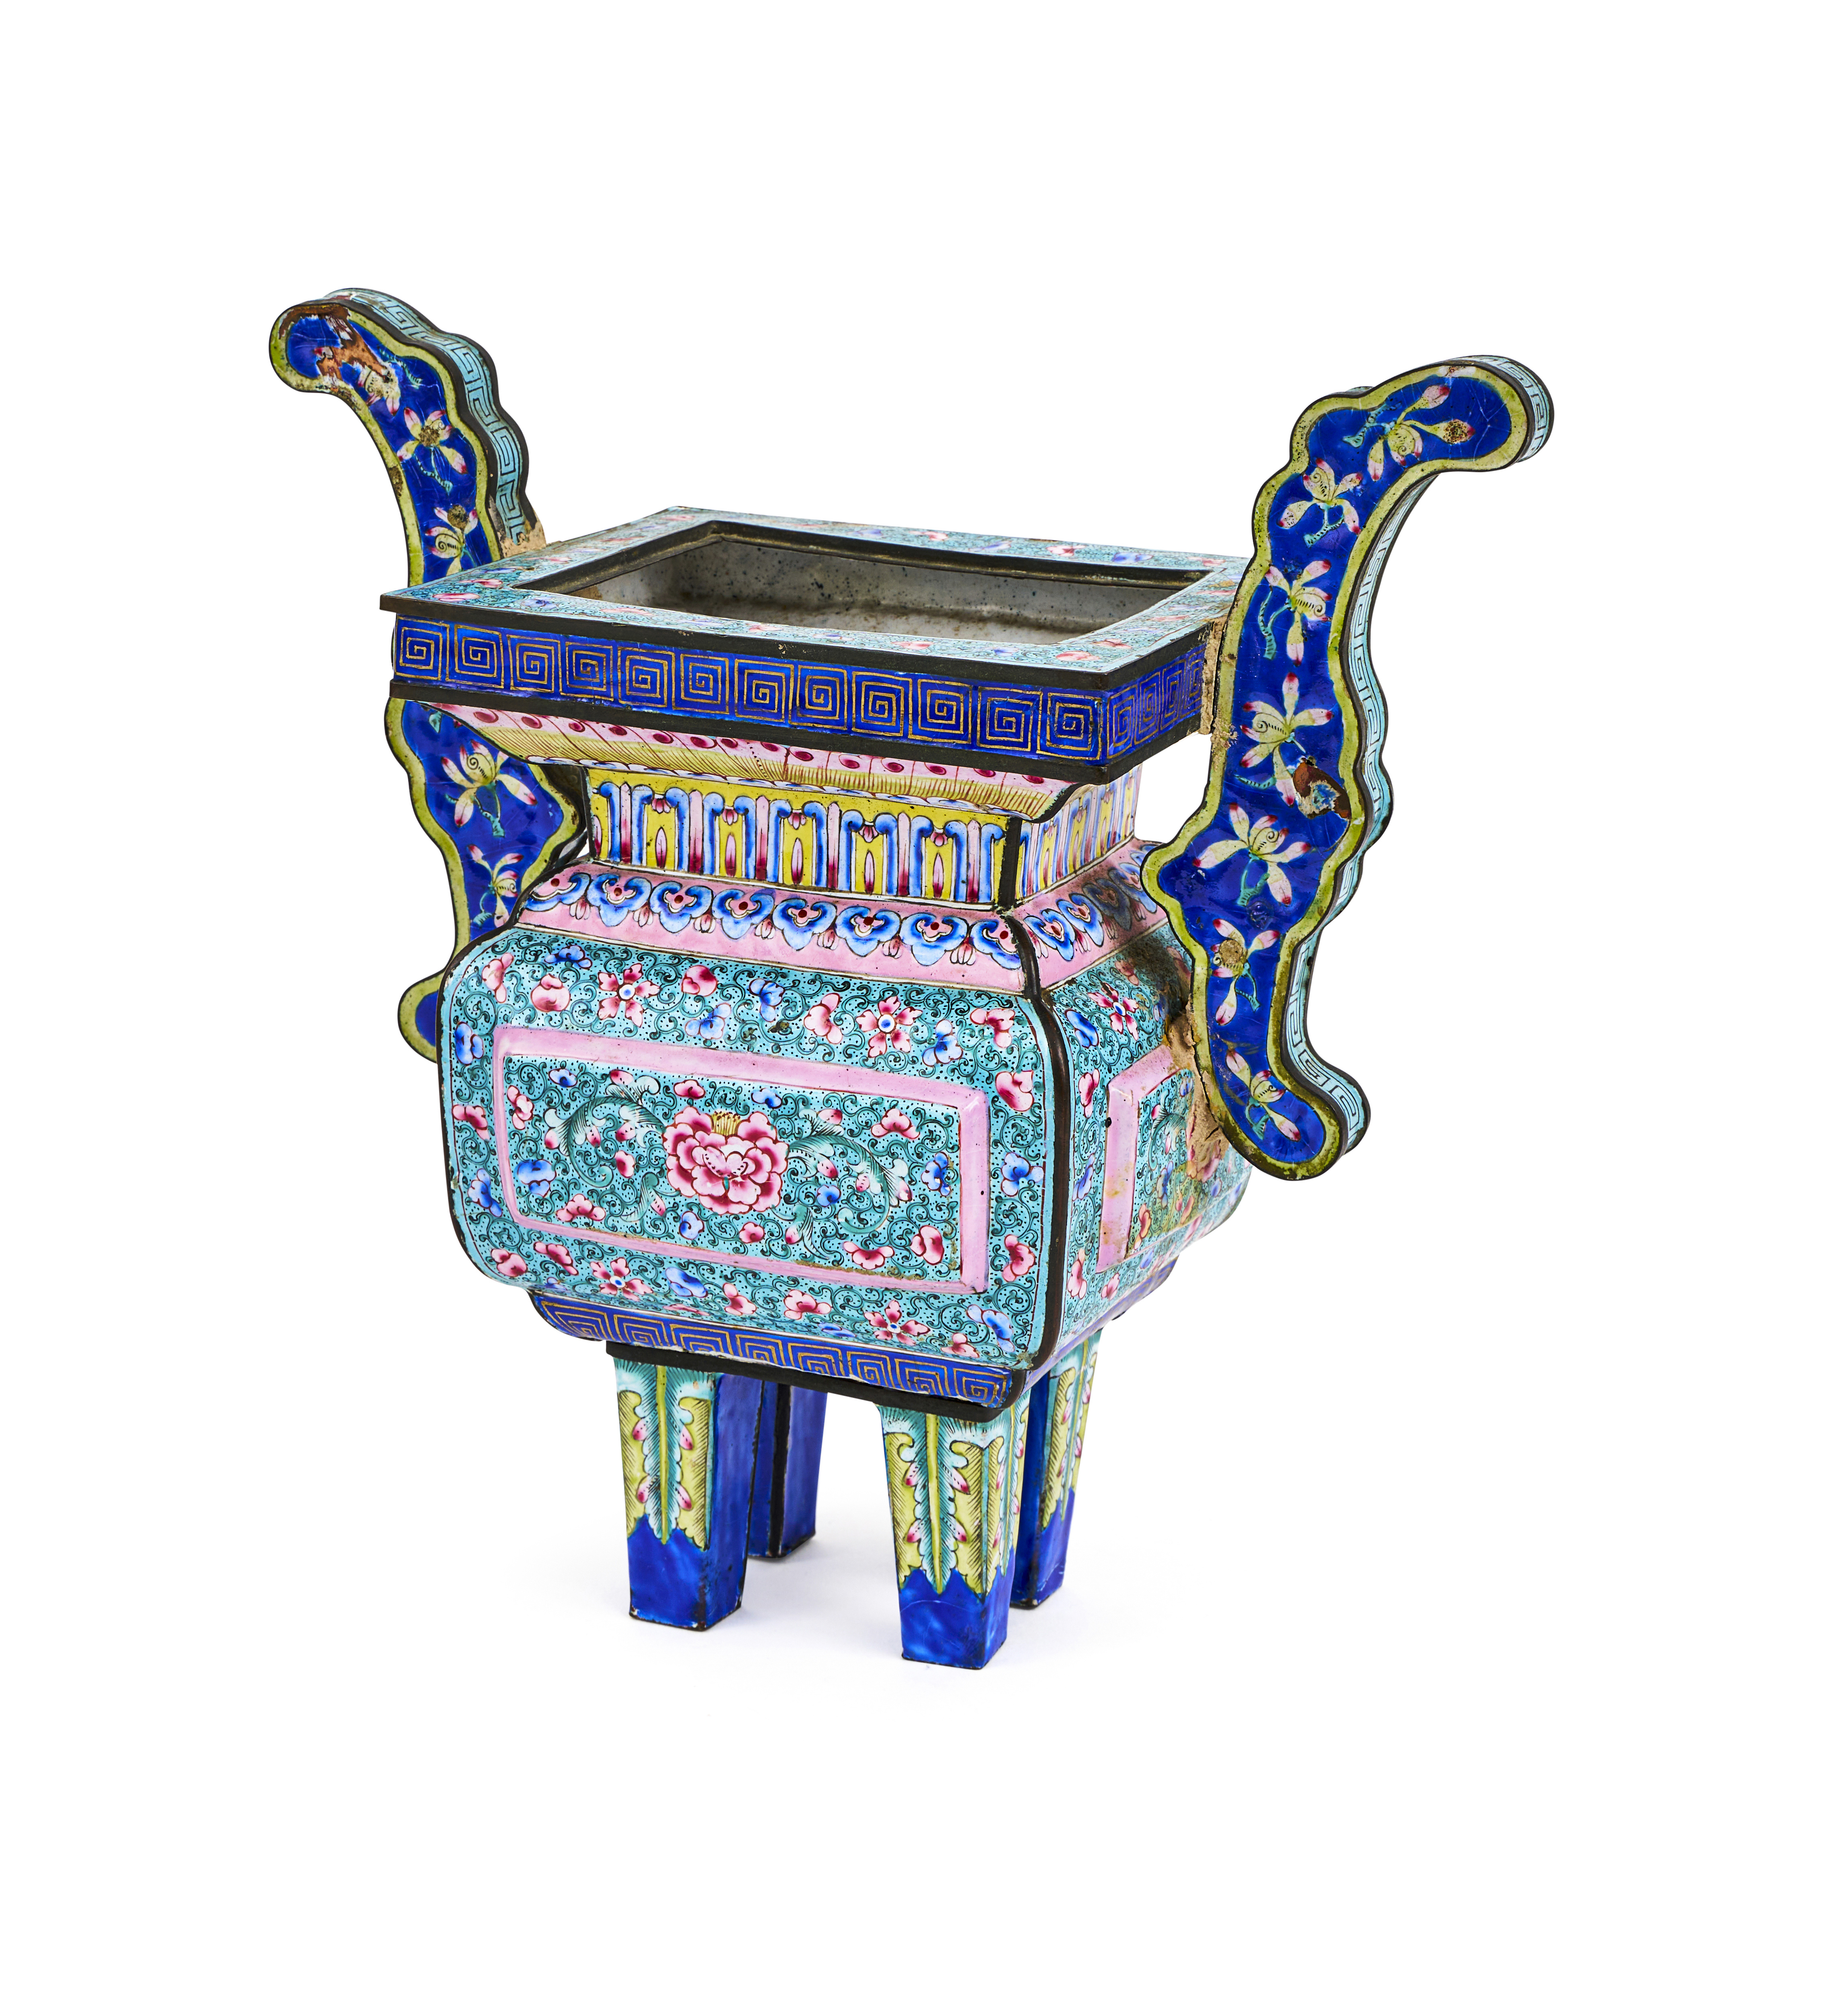 A CHINESE CANTON ENAMEL INCENSE BURNER & DISH, 18TH/19TH CENTURY - Image 2 of 6